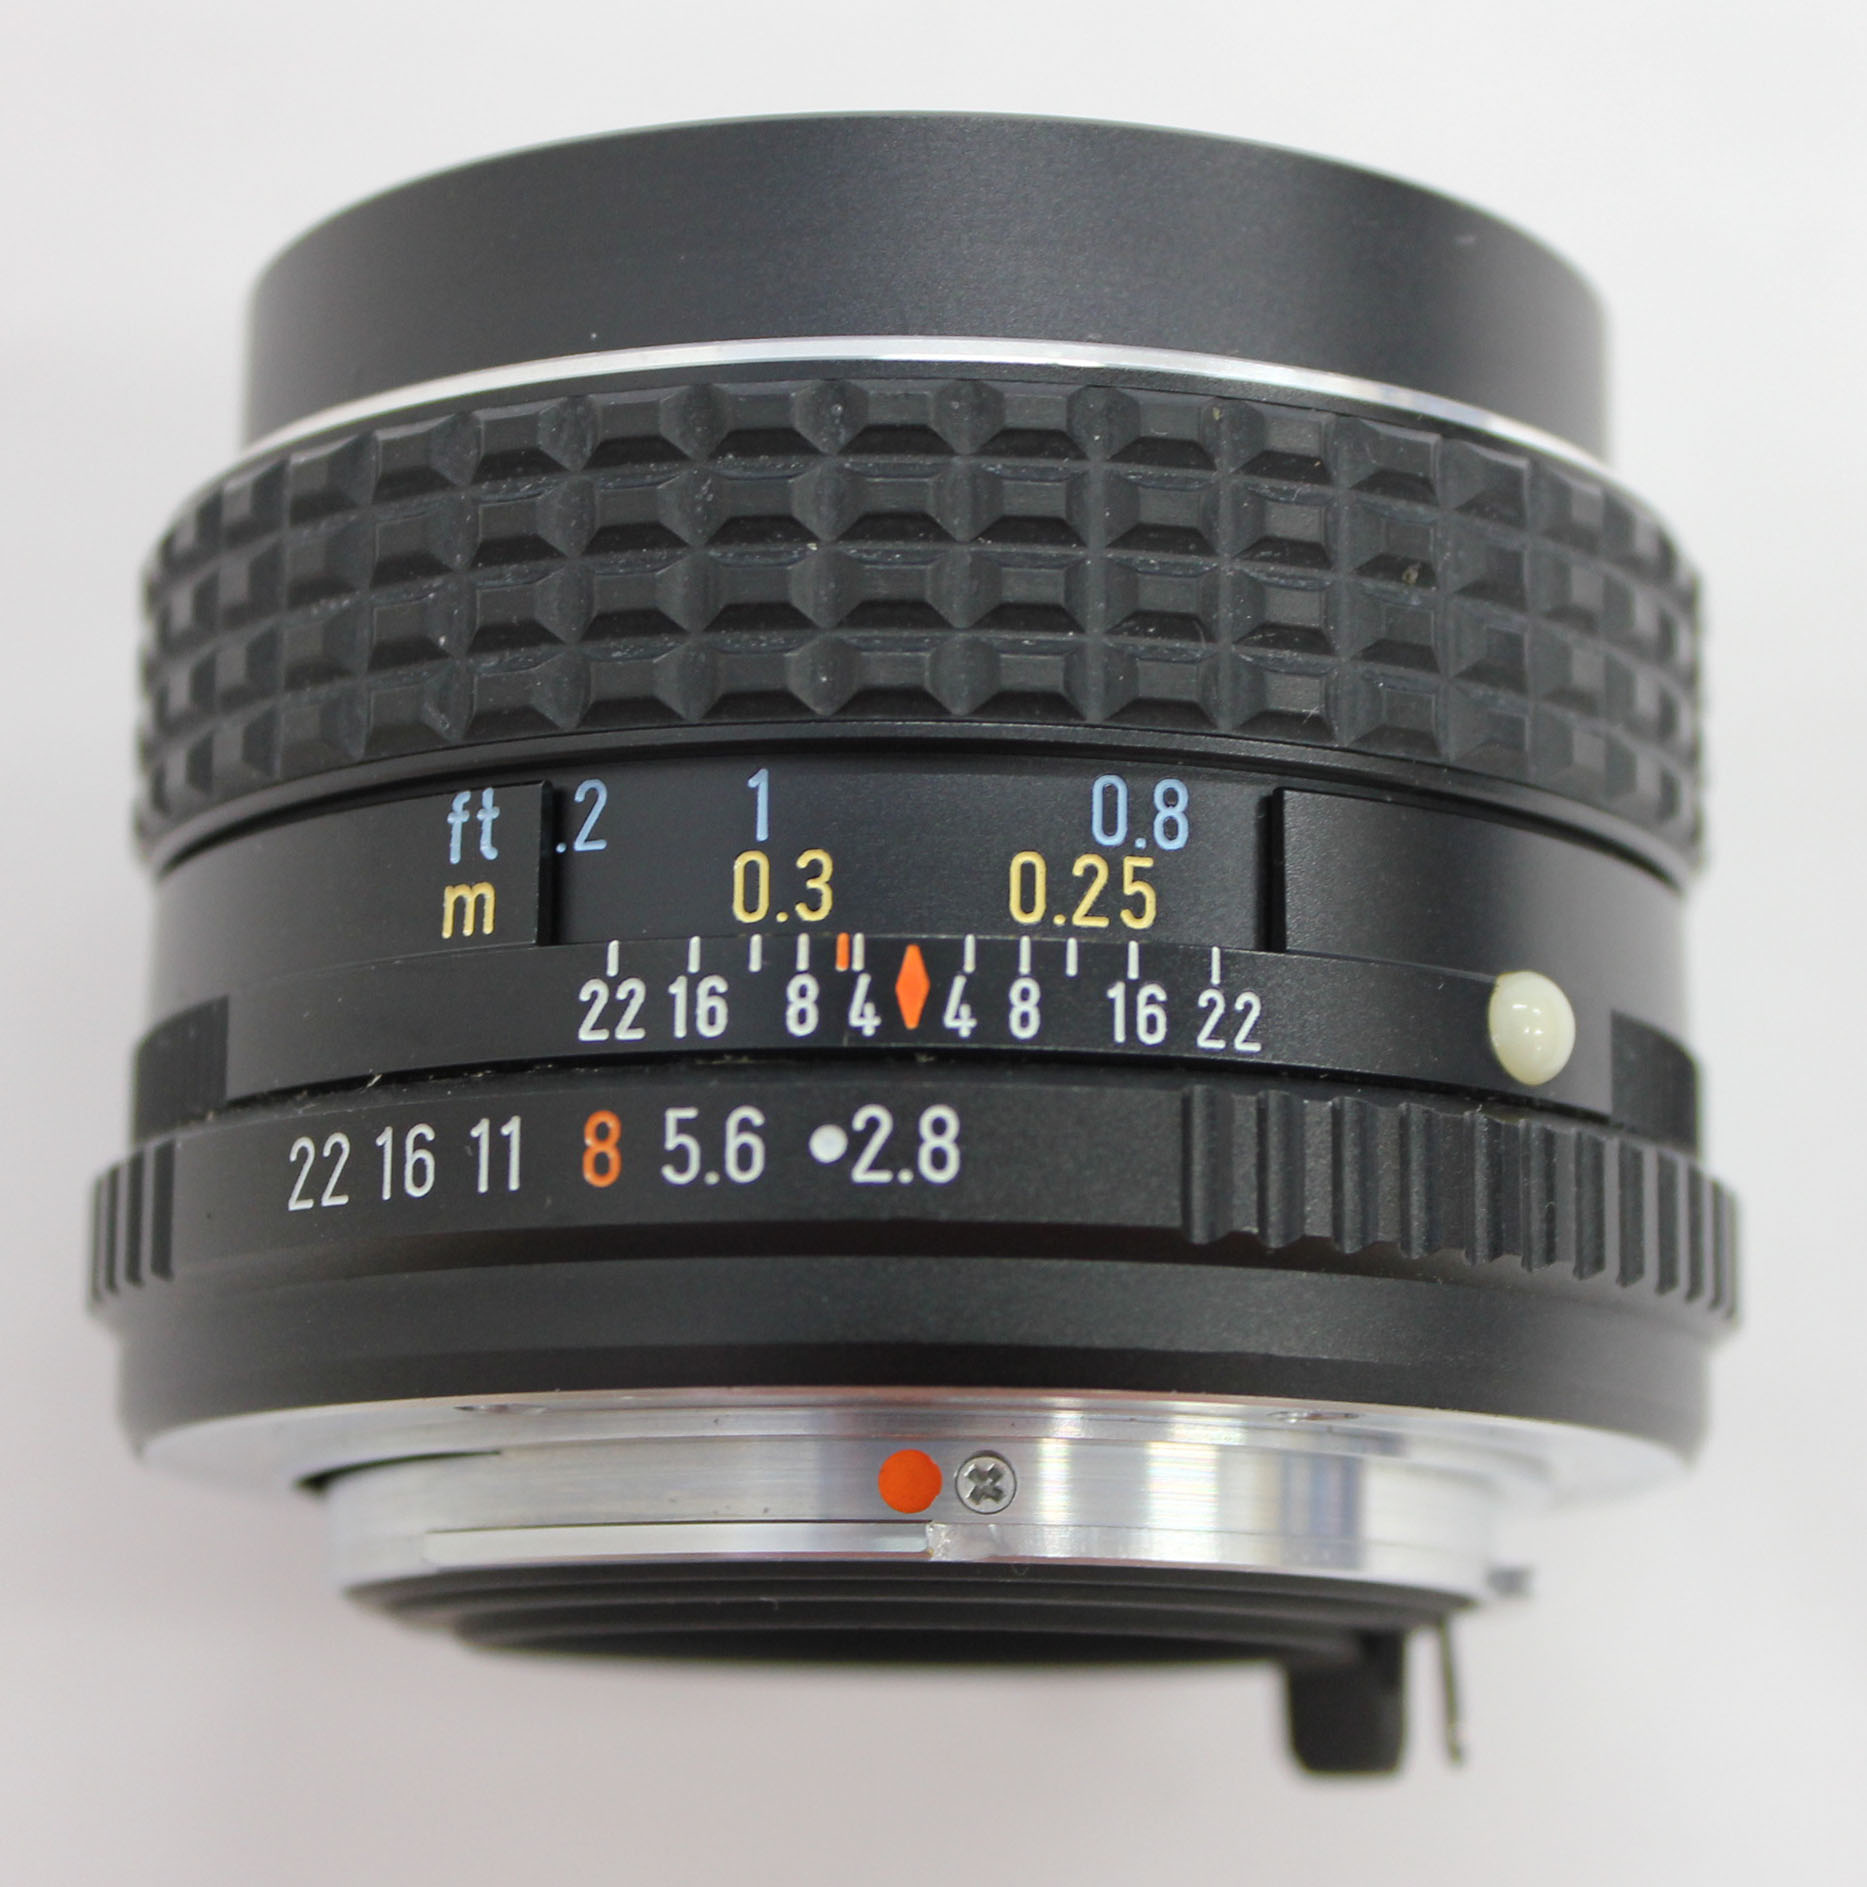 SMC Pentax 24mm F/2.8 MF Wide Angle K PK Mount Lens from Japan Photo 4